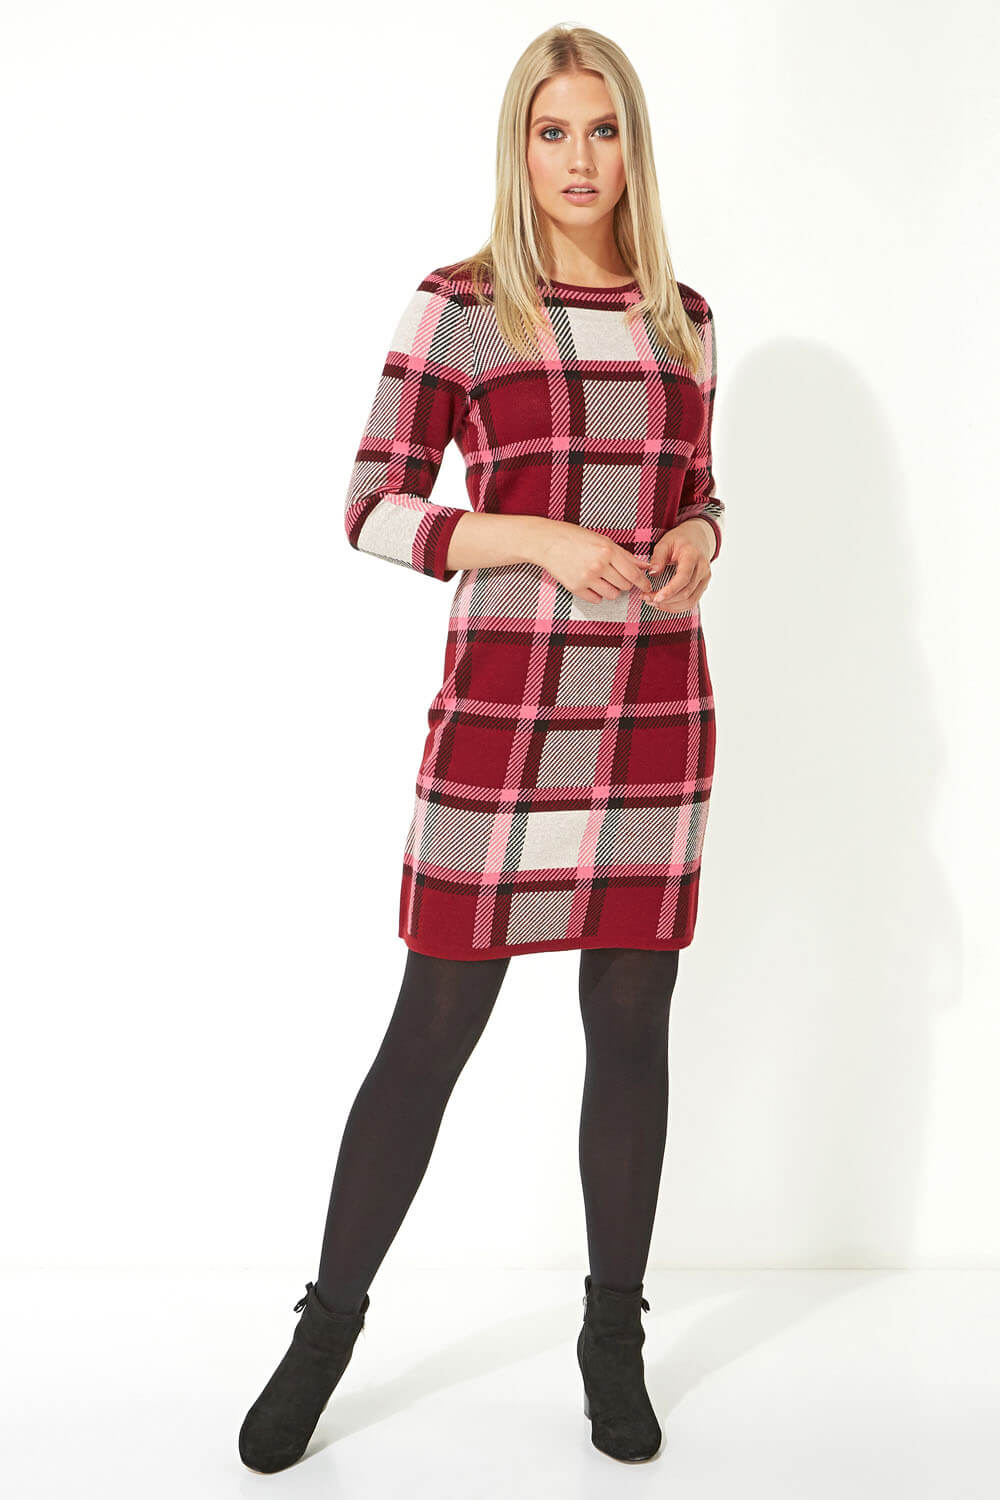 PINK Check Print Knitted Dress, Image 2 of 5